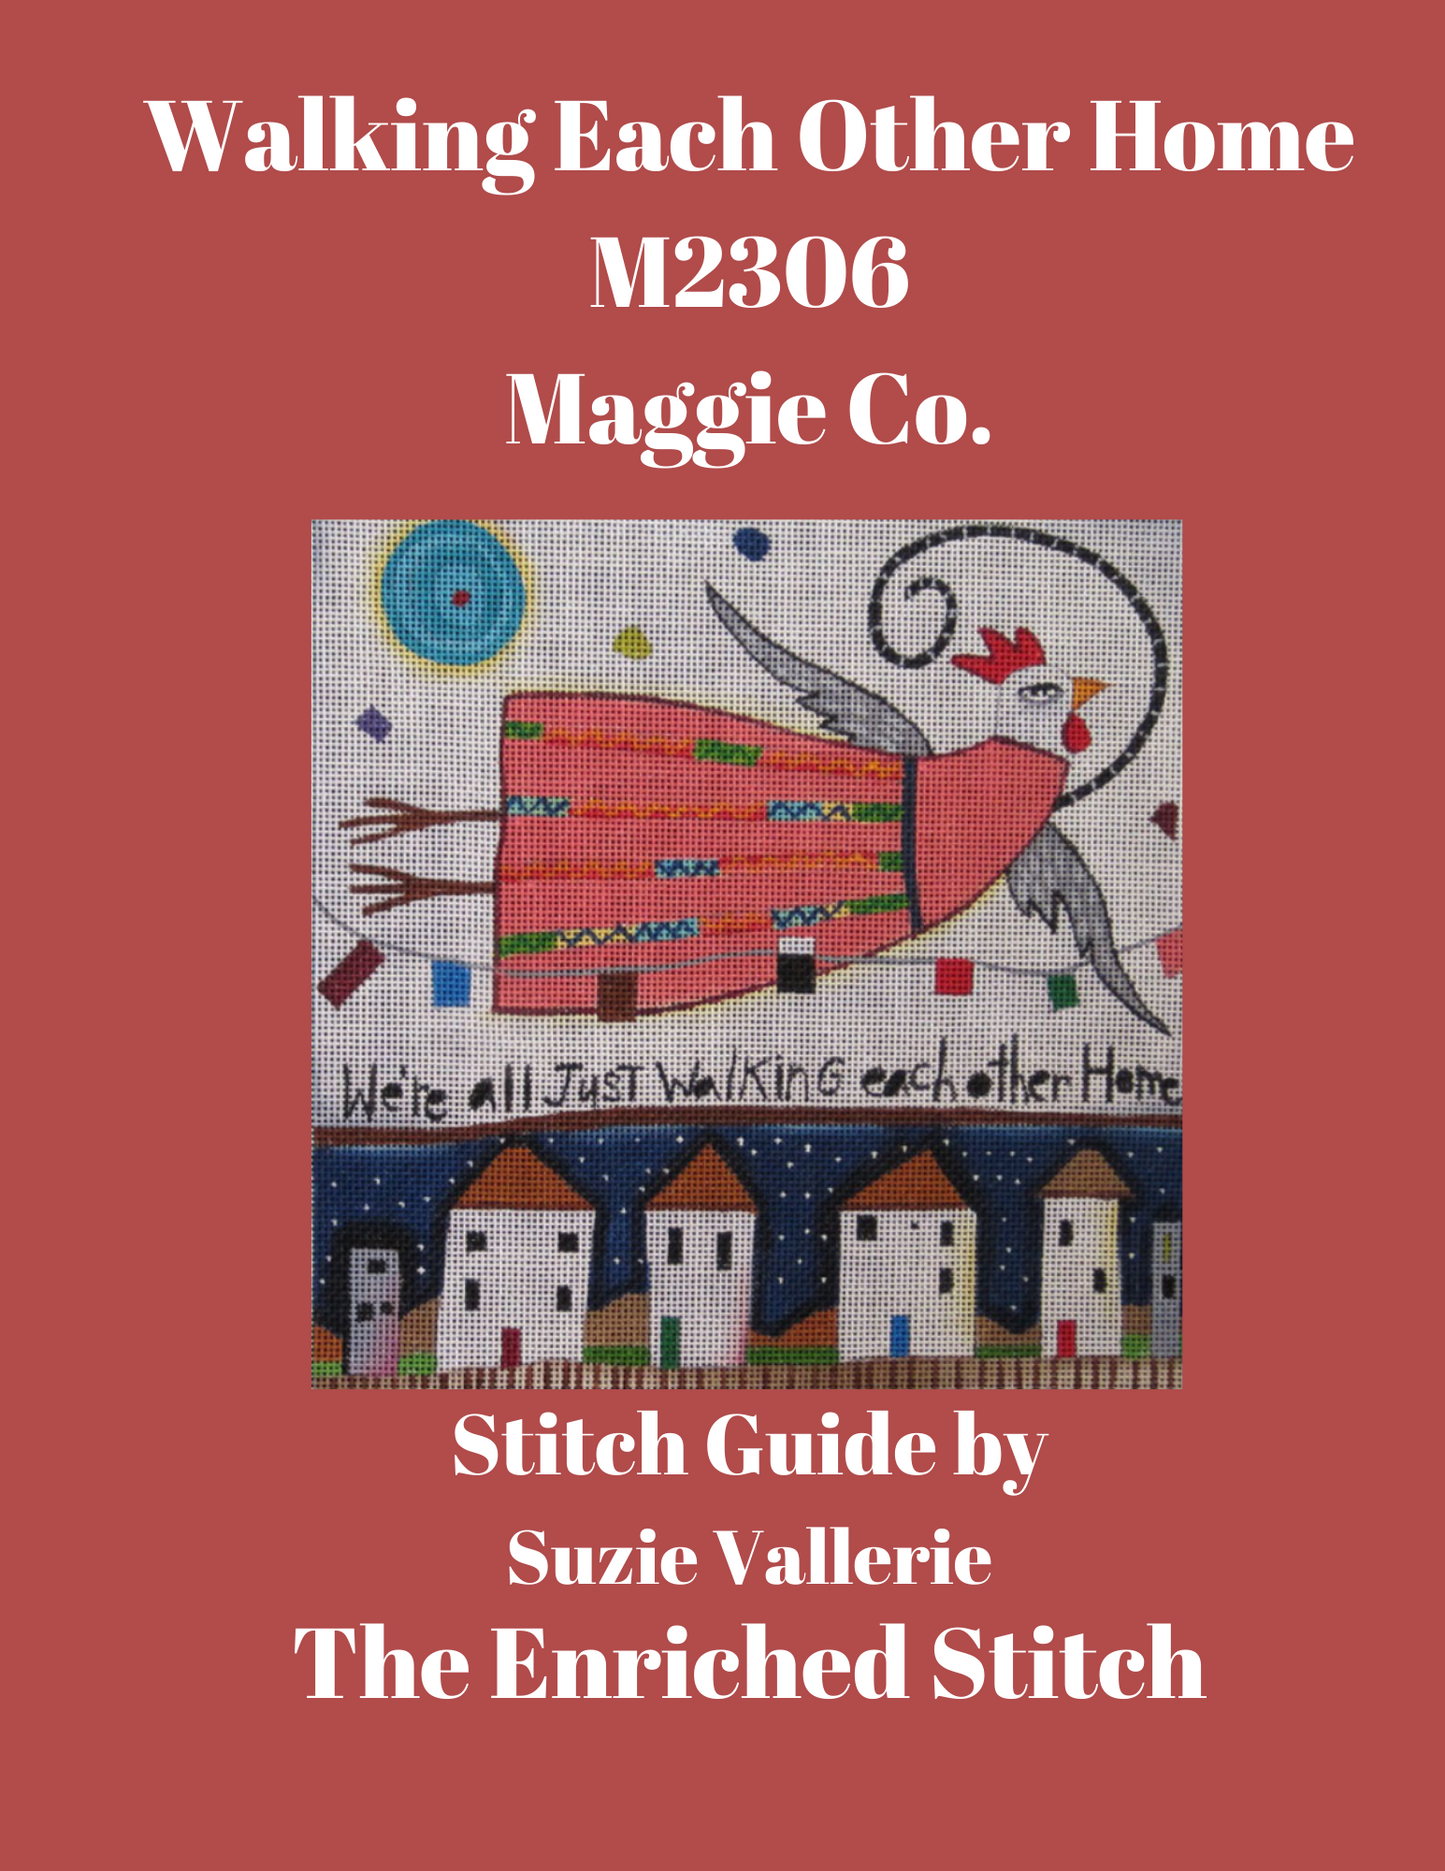 M2306 Walking Each Other Home Stitch Guide